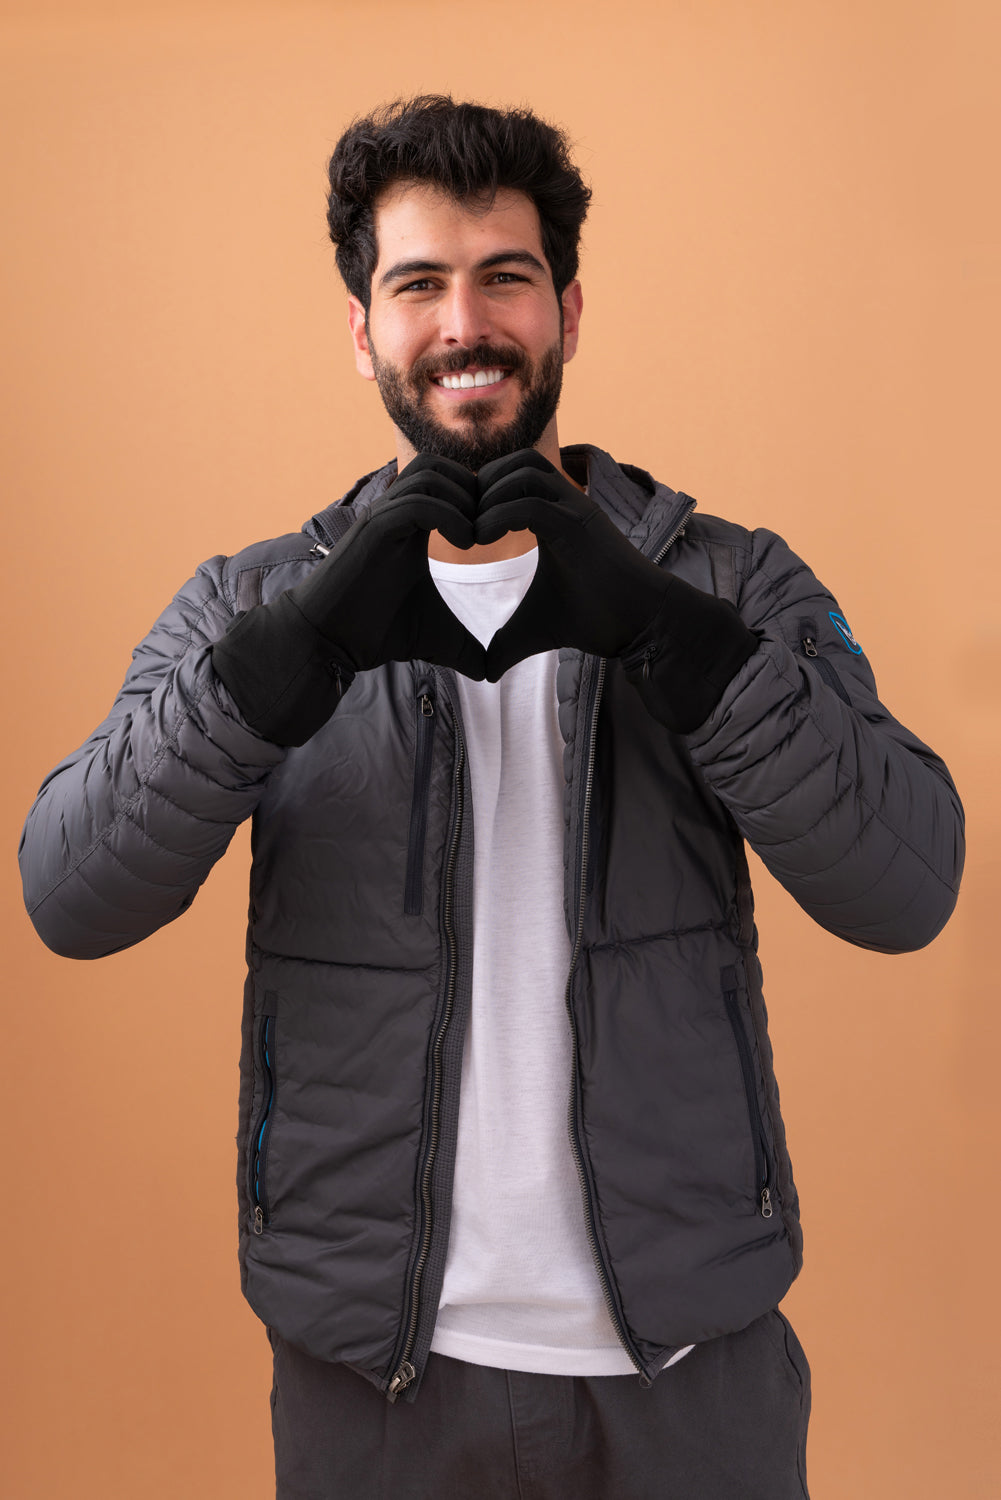 Toasty Touch® Ultra Thin Heated Gloves